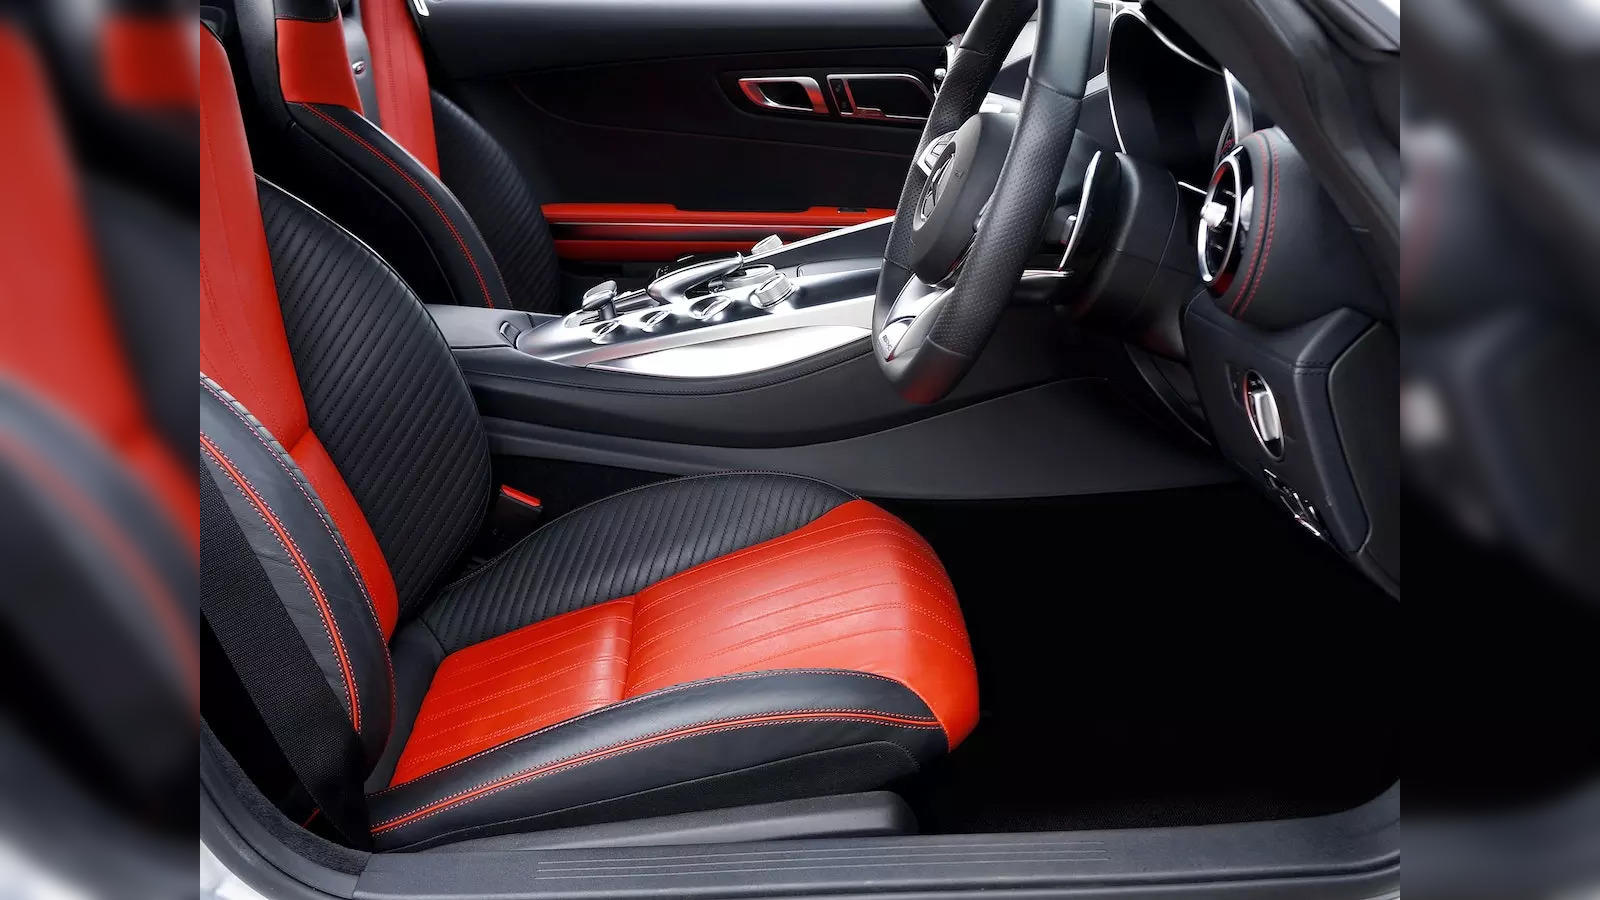 Car Accessories: Make Your Car Elegant, Stylish and Comfortable